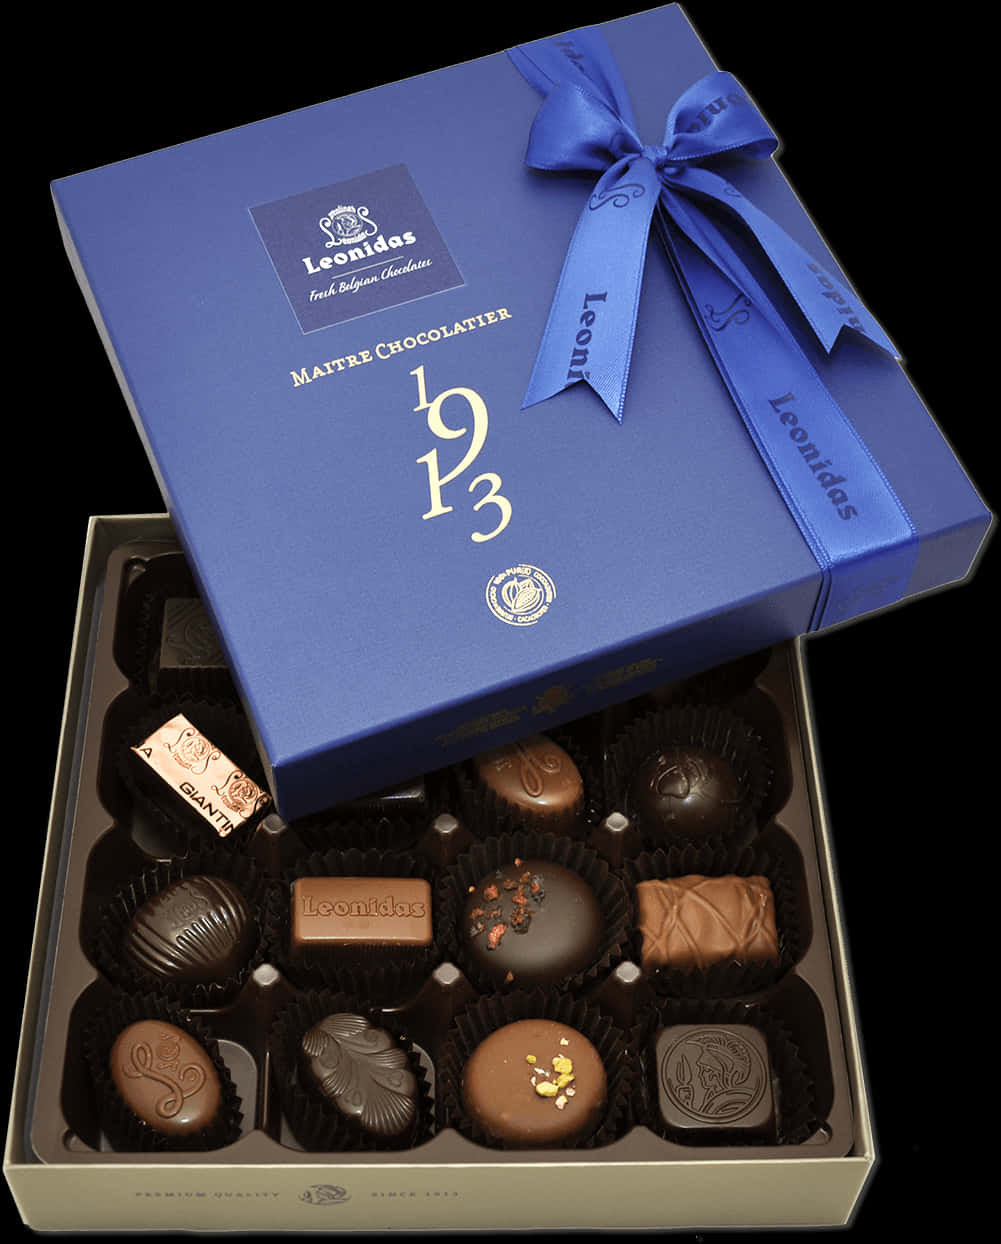 A Box Of Chocolates With A Blue Bow